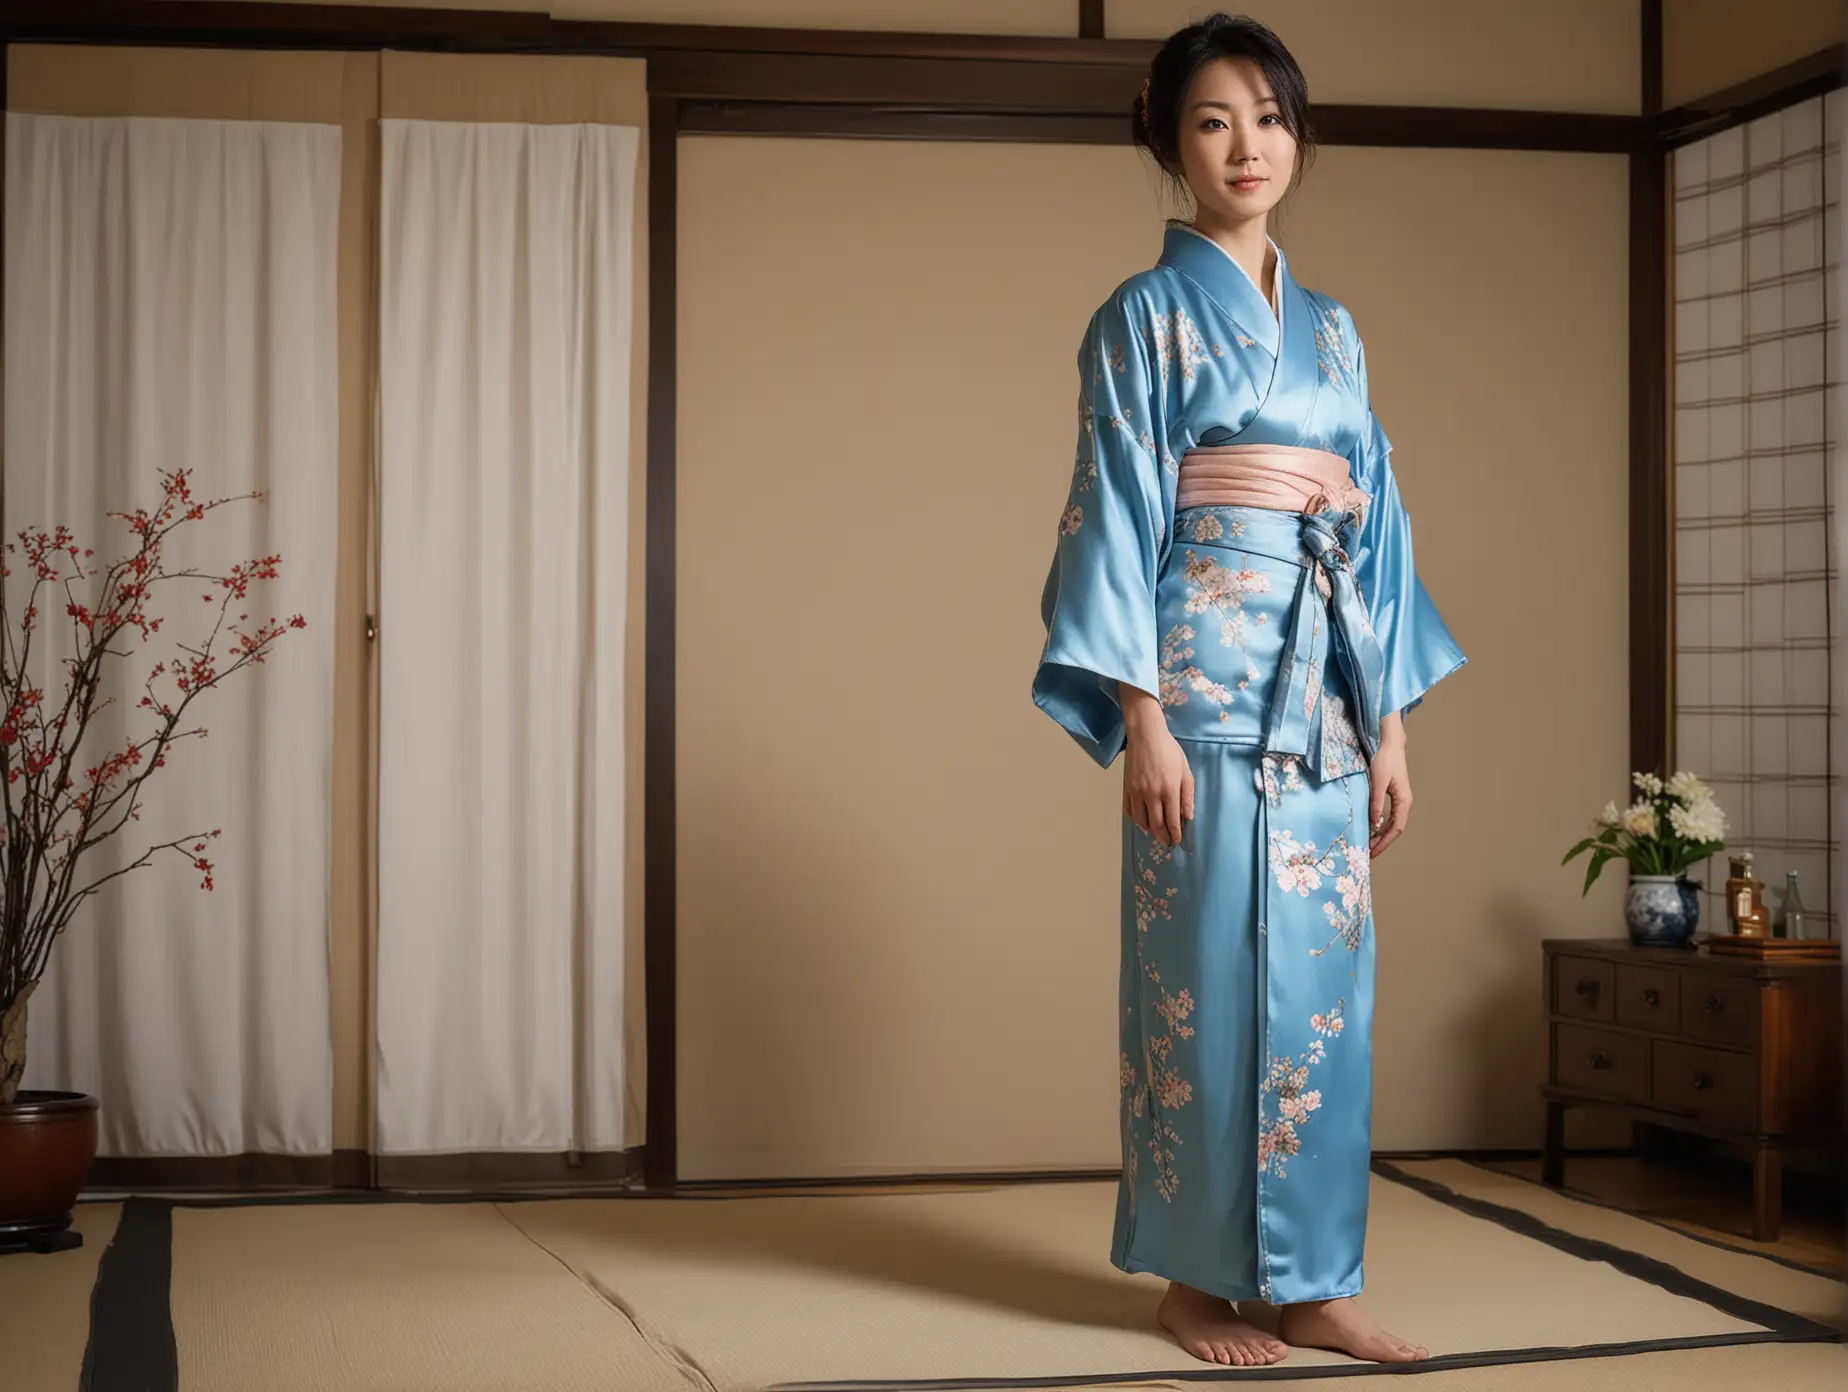 Produce a high detail photo depicting a single woman from Japan, aged 39, wearing a beautiful ankle length sky blue silk kimono, stood on floor in traditional Japanese style bedroom. Maintain a distance of 5 m to 10 m between the subject and the camera equipment. Utilize a Sigma 85mm f/1.4, 35mm, Sony A7 IV. Employ single-point autofocus (AF-S) and Auto White Balance (AWB) for ease. Ensure the camera is set to shoot in RAW format. Formatted in 16:9 widescreen. Consider center-weighted or spot metering. Account for ambient light conditions and adjust camera settings accordingly for optimal results.